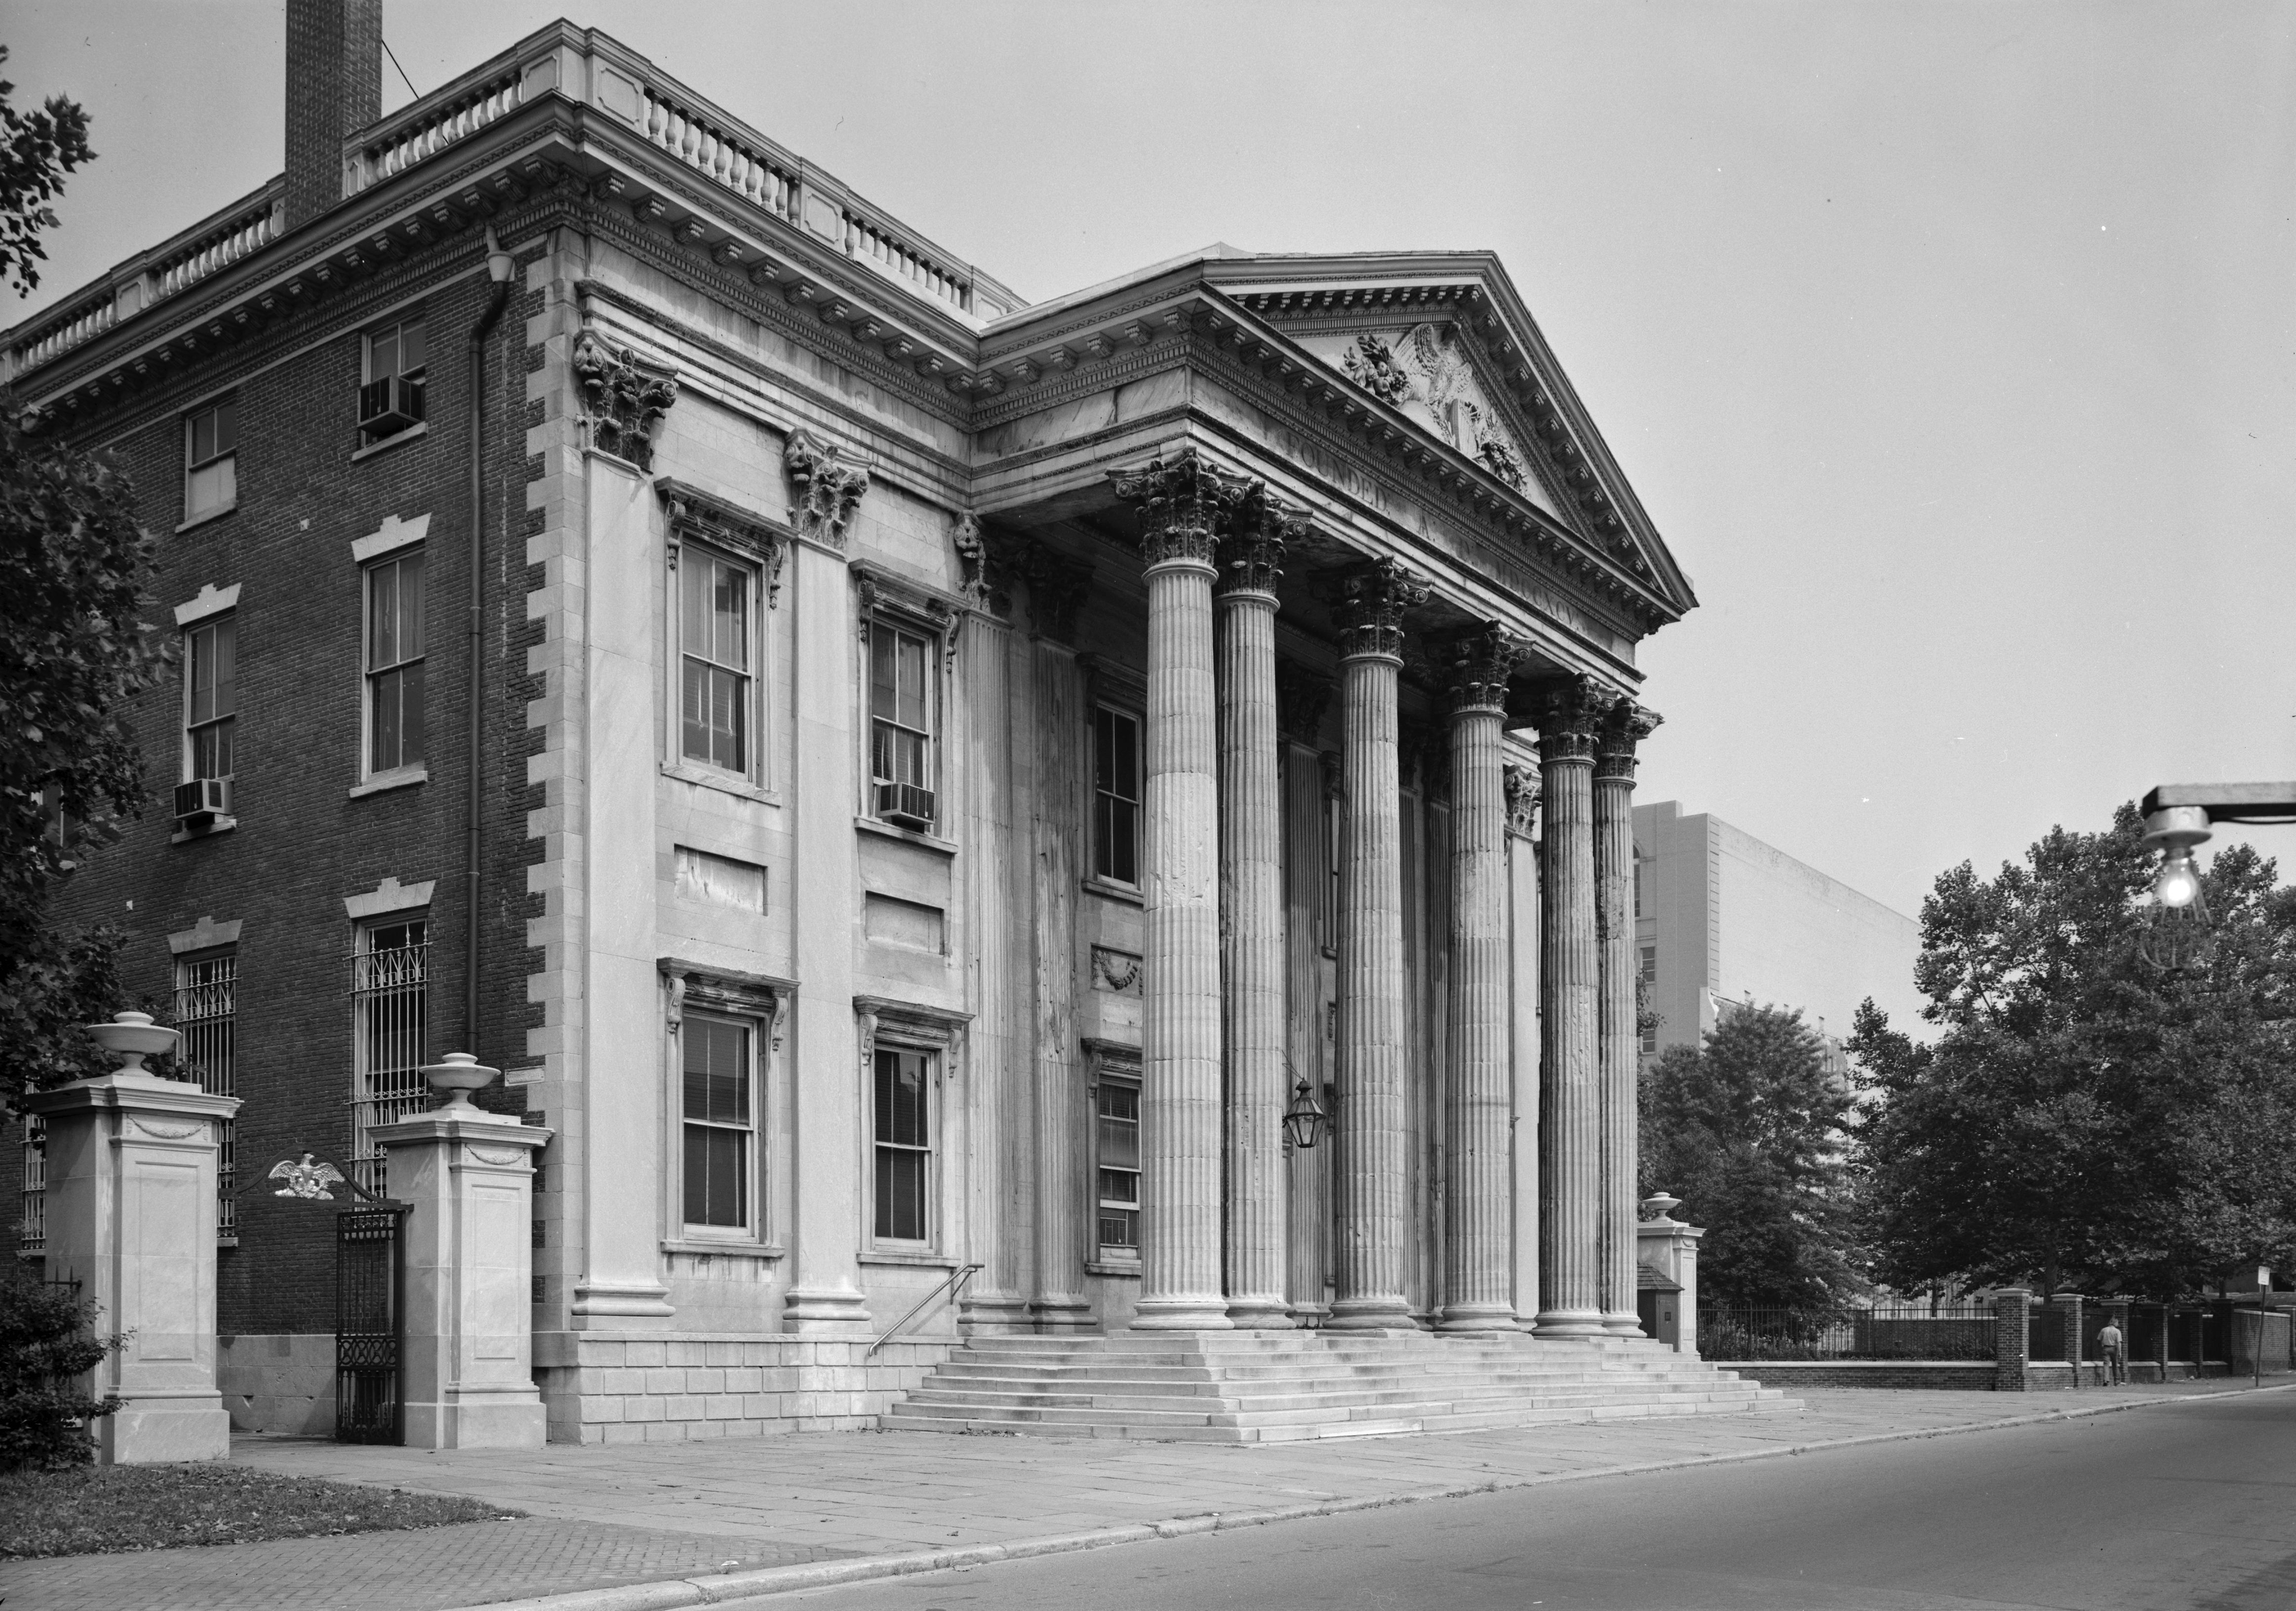 File:First national bank US HABS.jpg - Wikimedia Commons